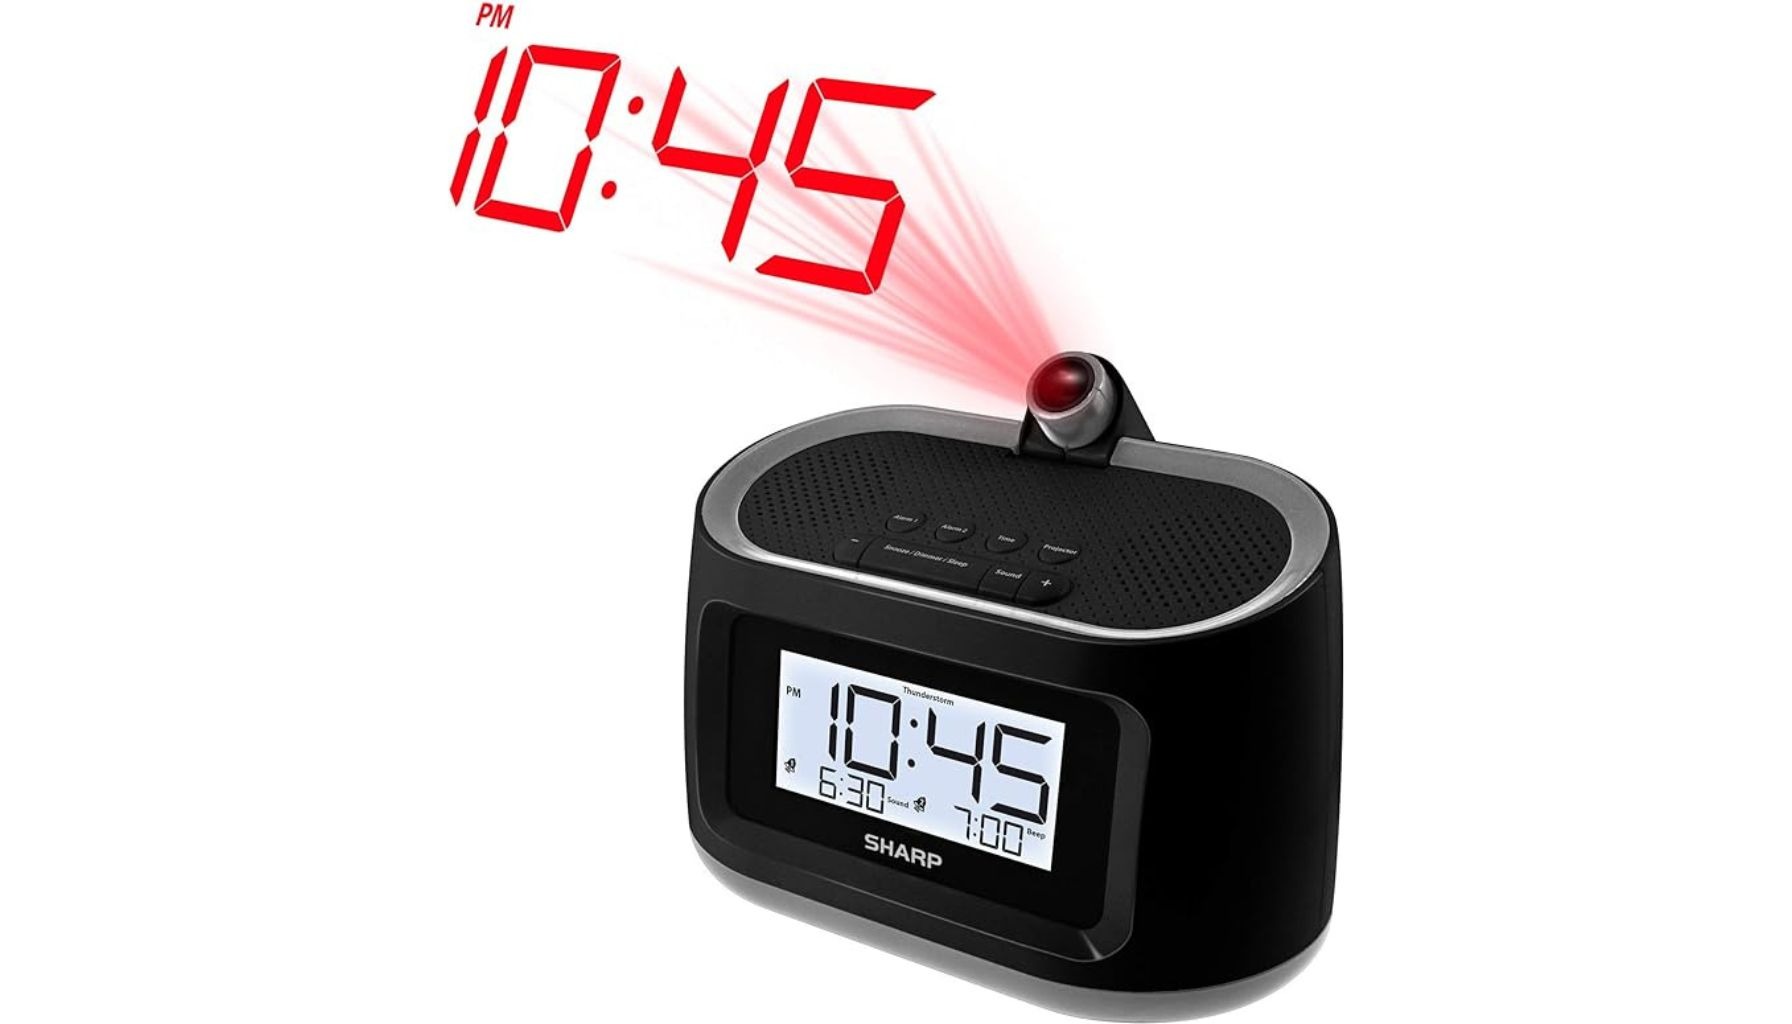 SHARP LCD and Projection Alarm Clock Review